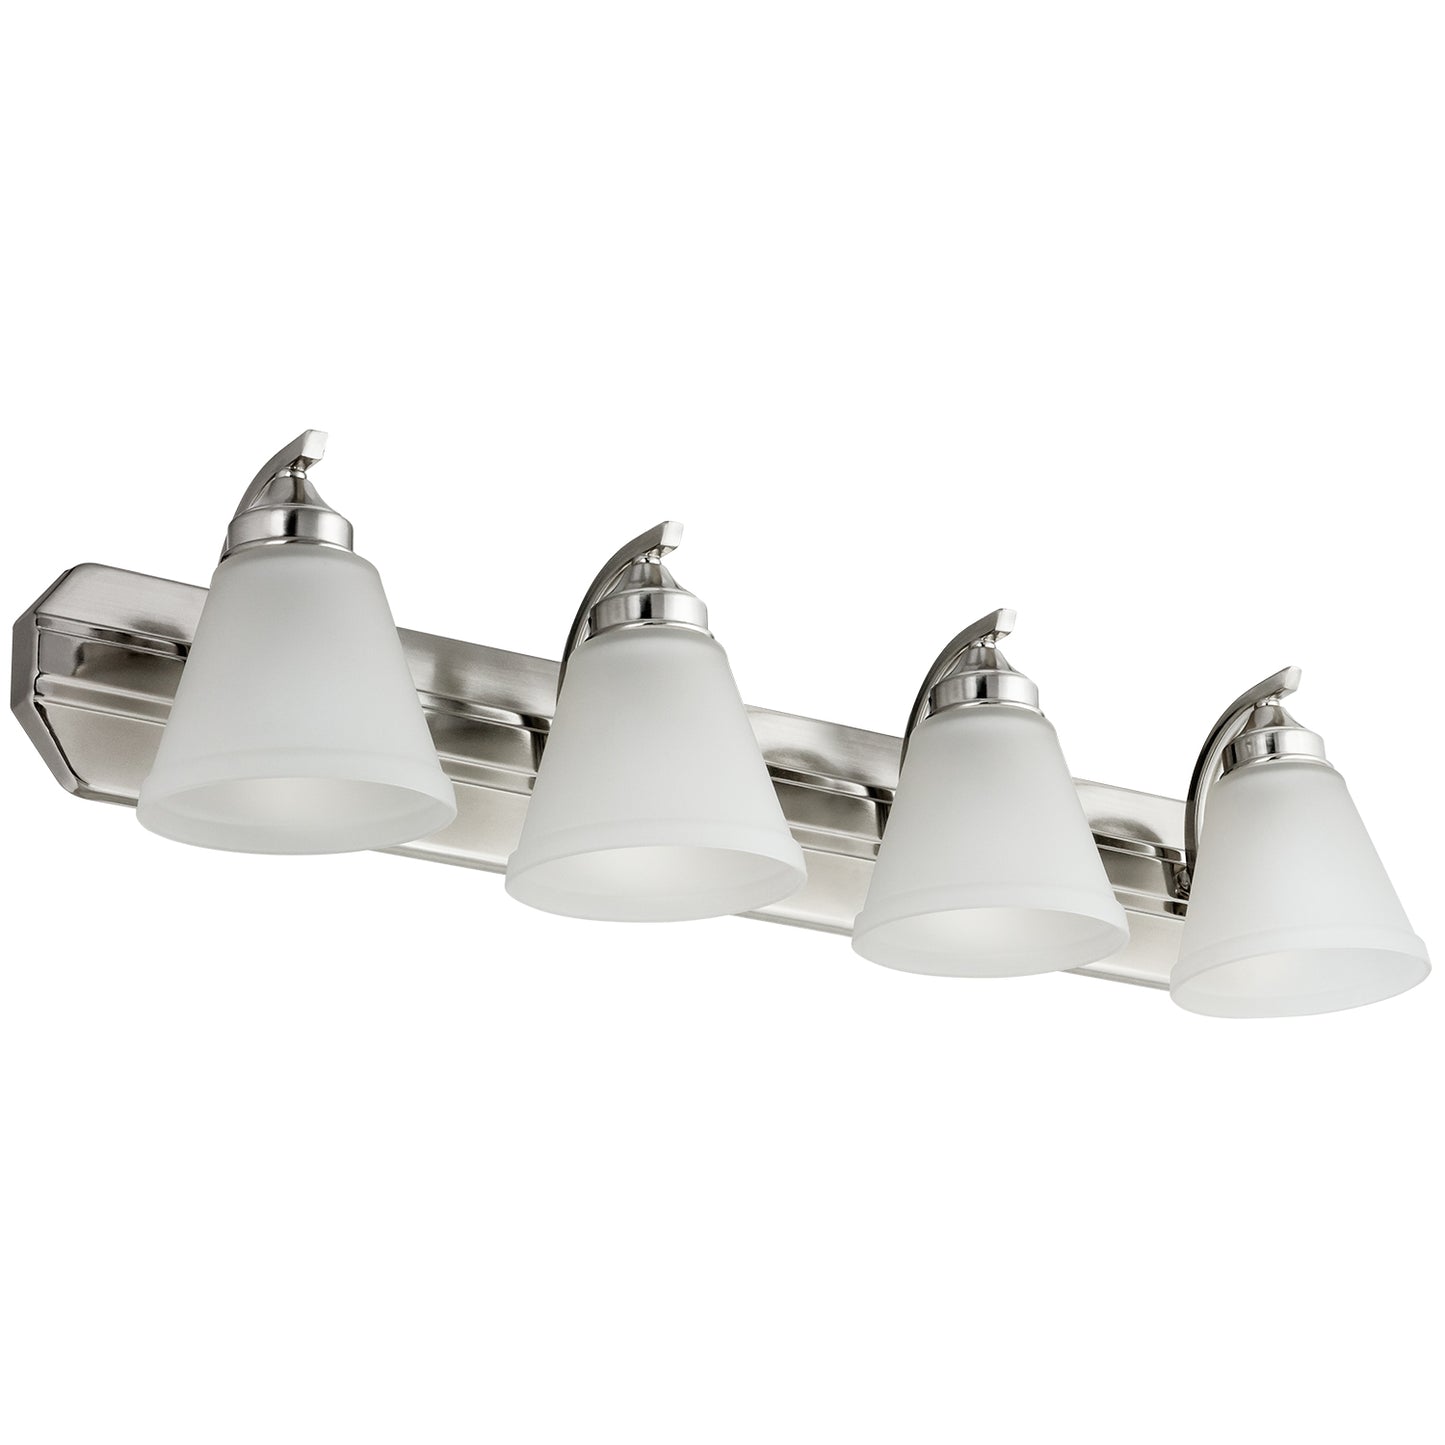 Sunlite - Modern Bell Vanity Fixture, Frosted Glass Shade, 4 Light Brushed Nickel Finish